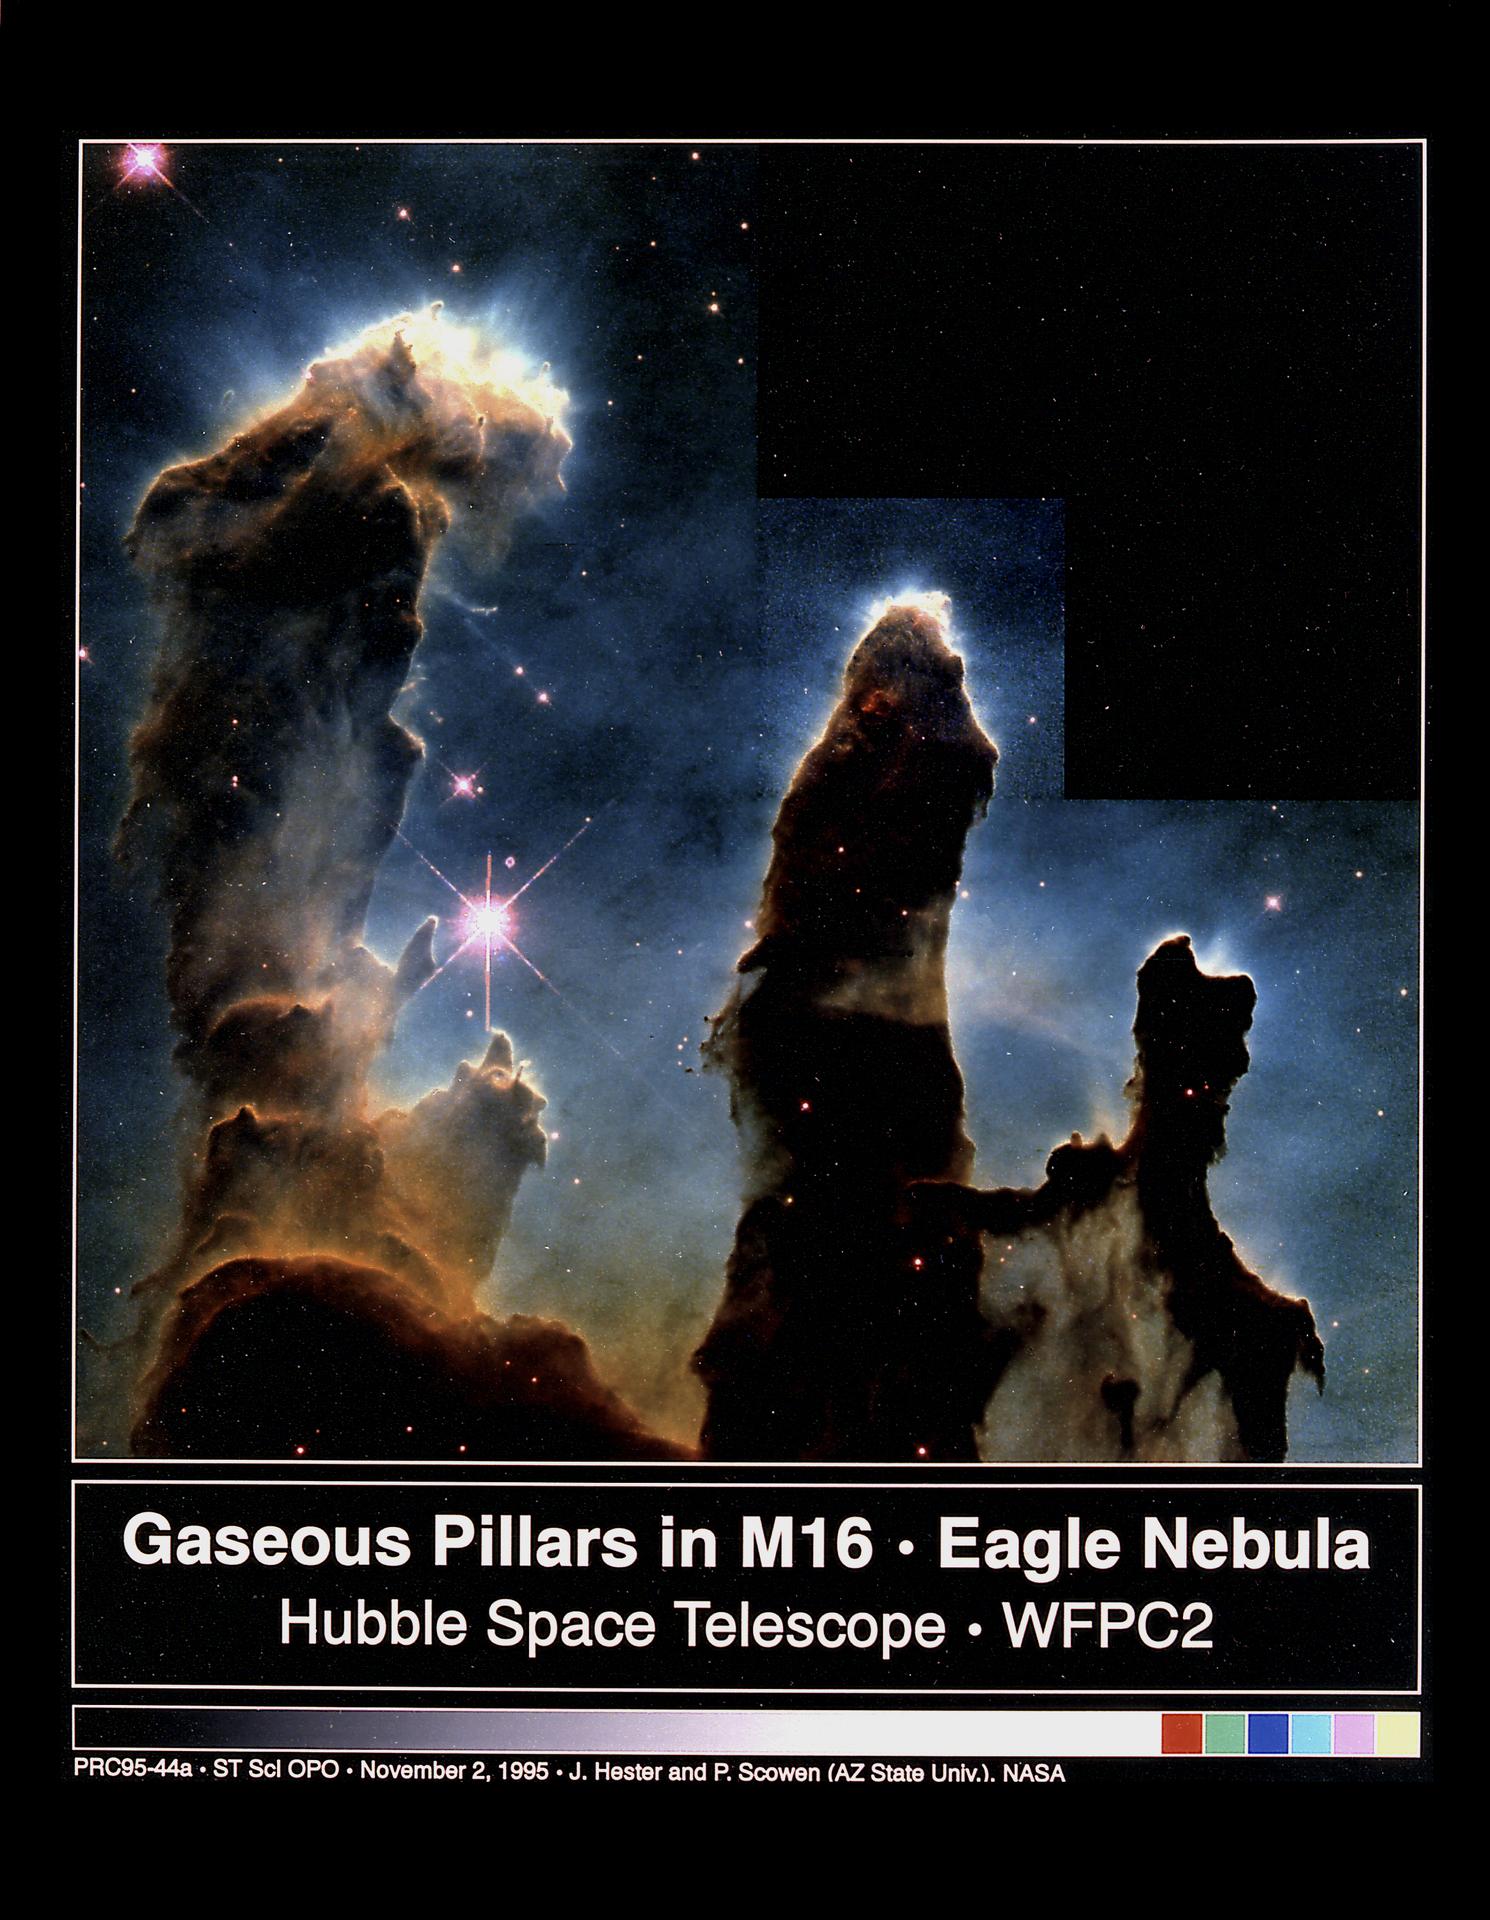 Part of the Eagle Nebula taken by the Hubble Space Telescope on April 1, 1995.